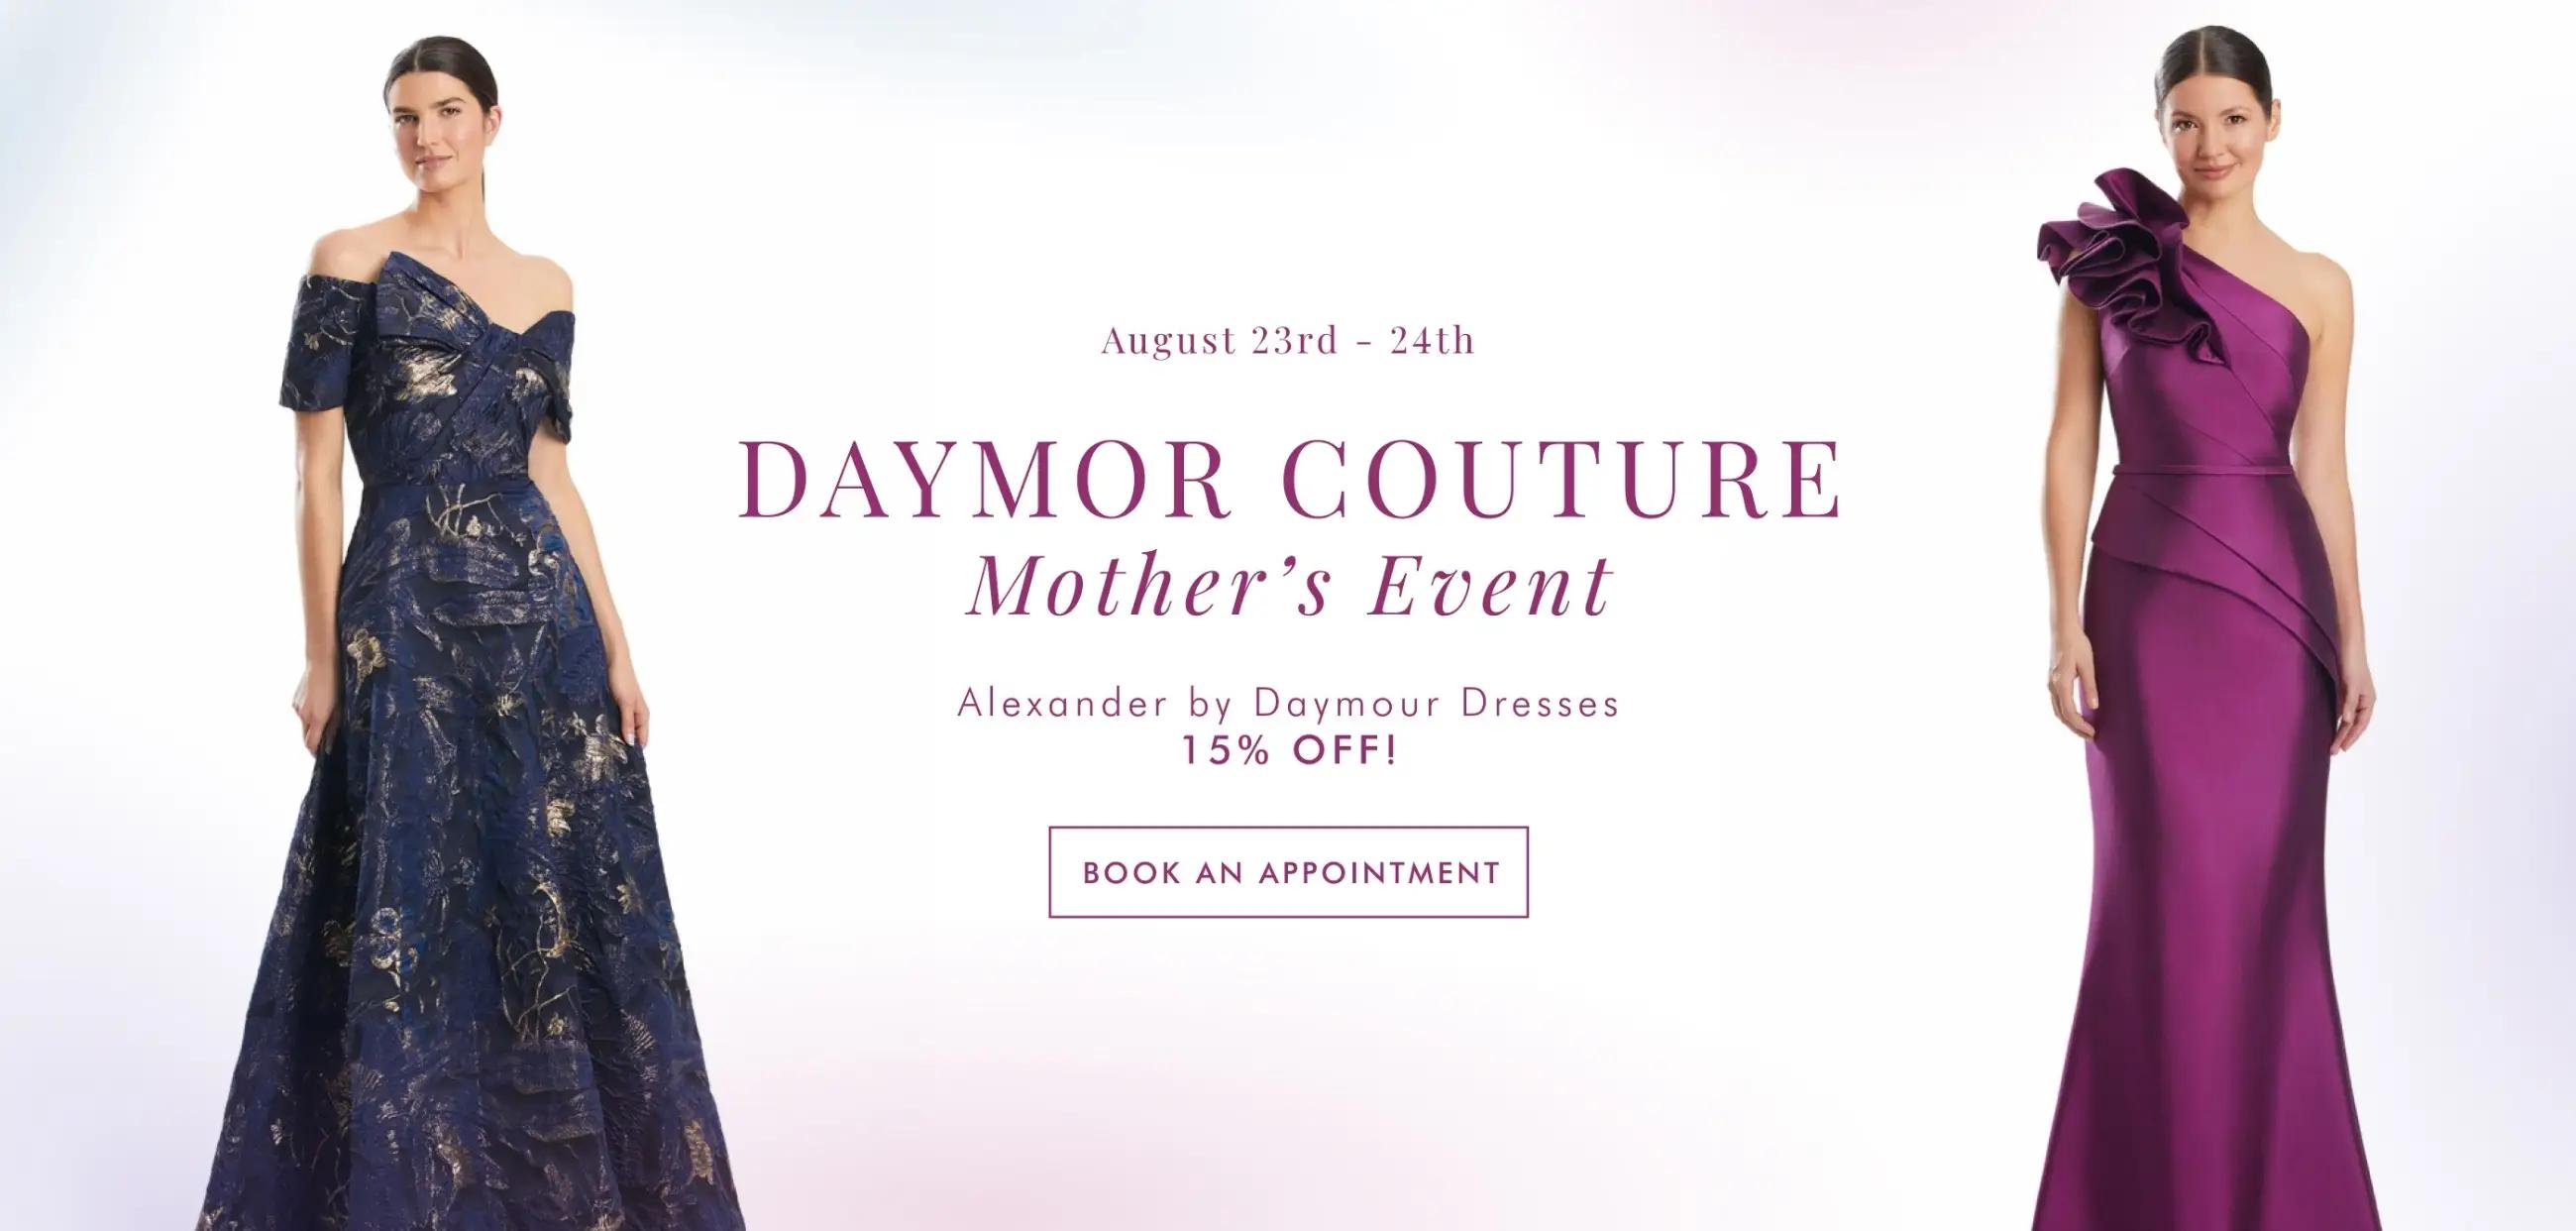 Desktop Daymor Couture Mother's Event Banner